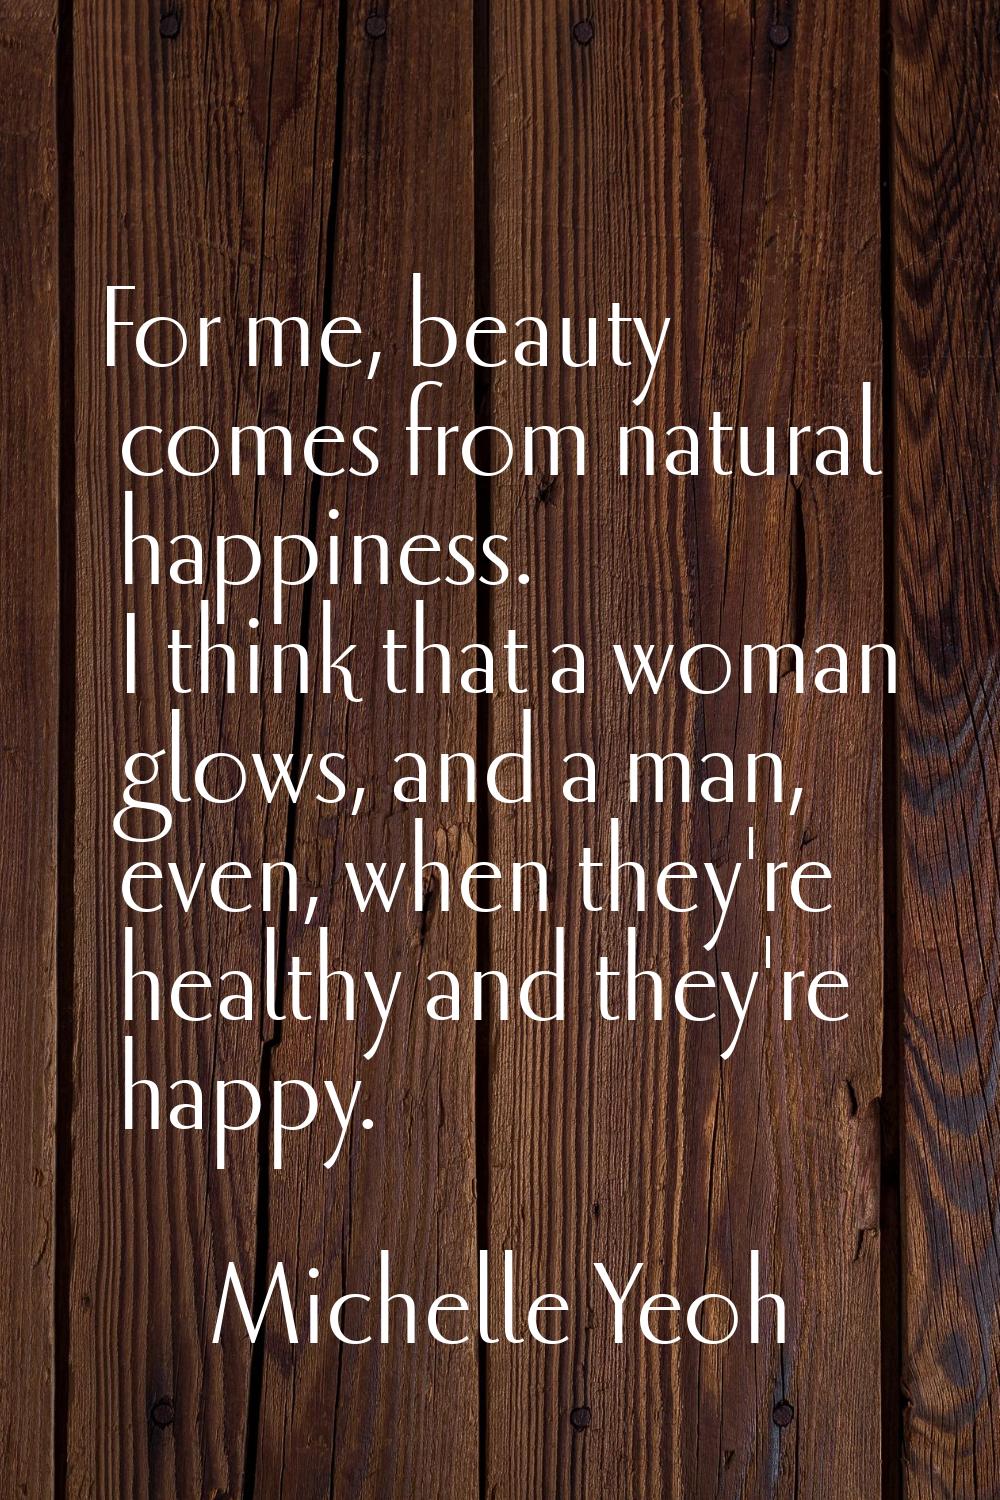 For me, beauty comes from natural happiness. I think that a woman glows, and a man, even, when they